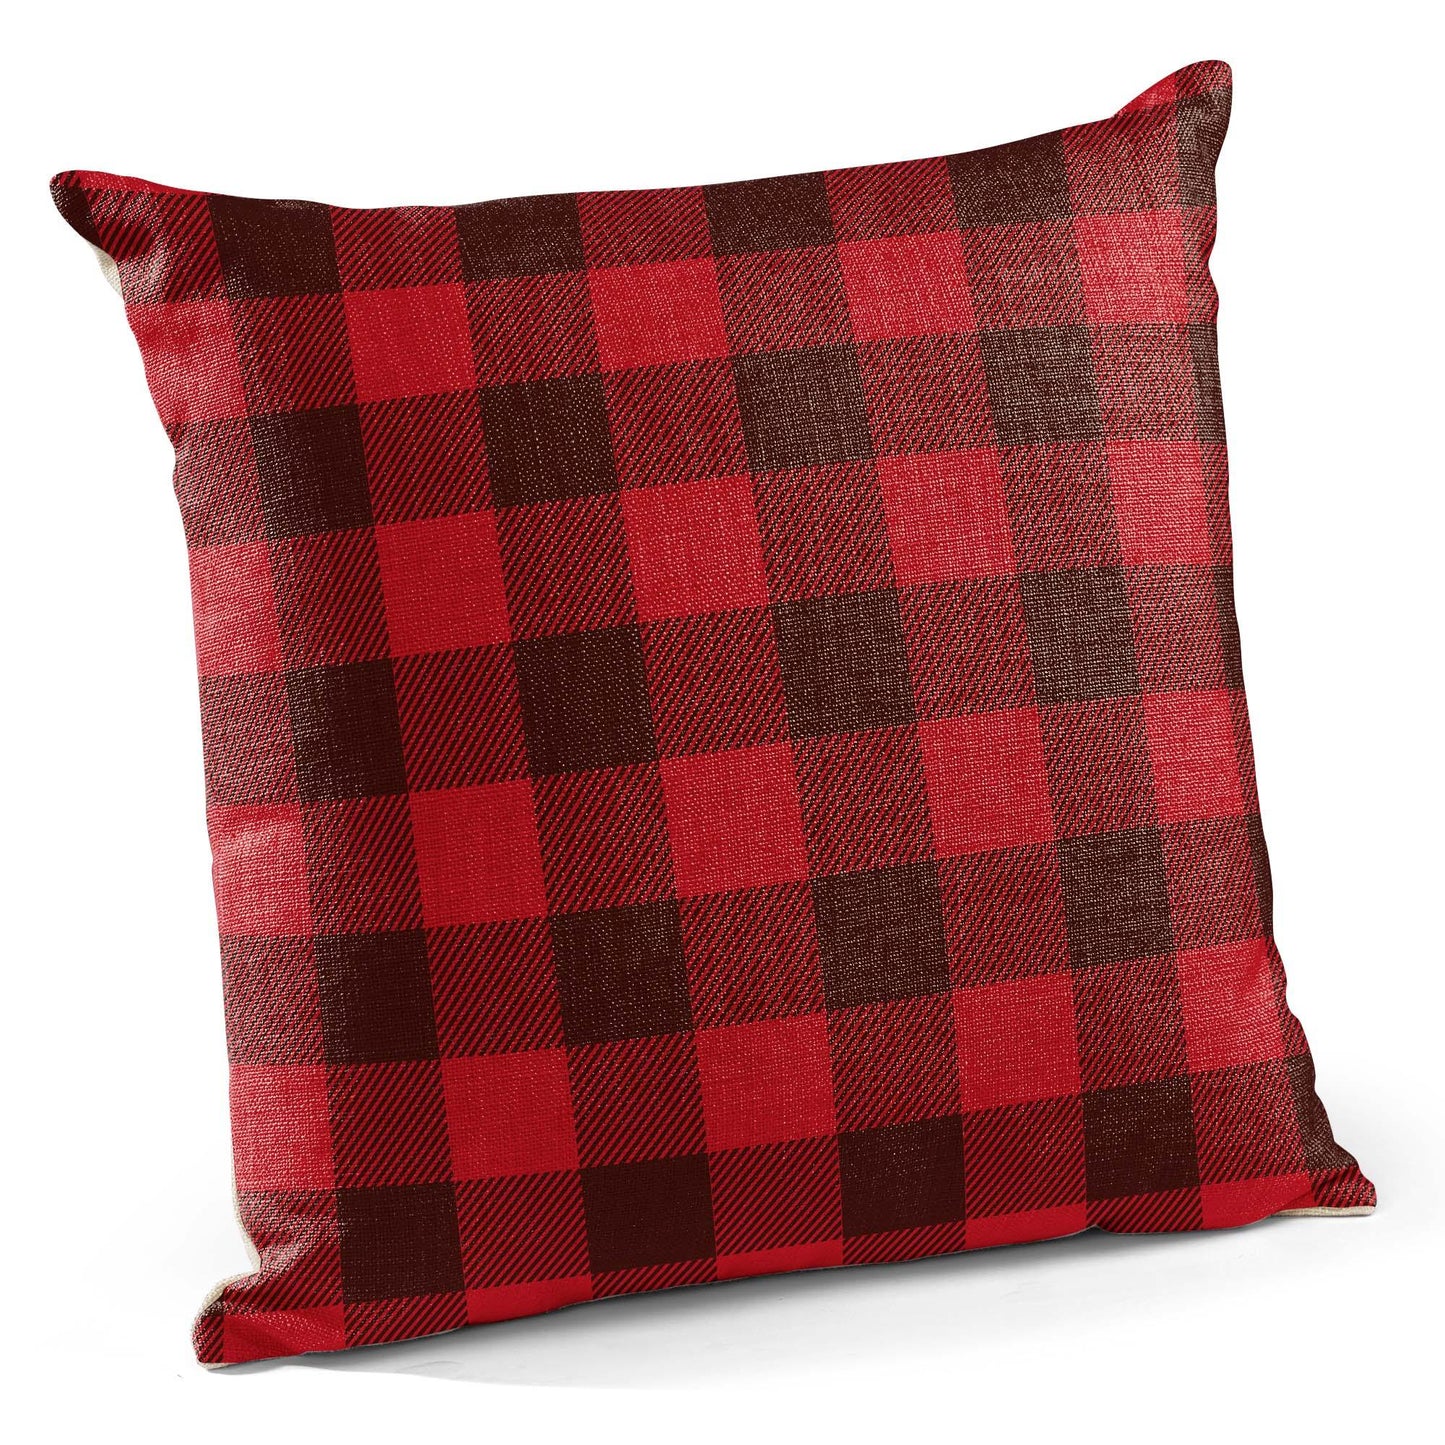 Over the River 18" Decorative Pillow - Wild Wings